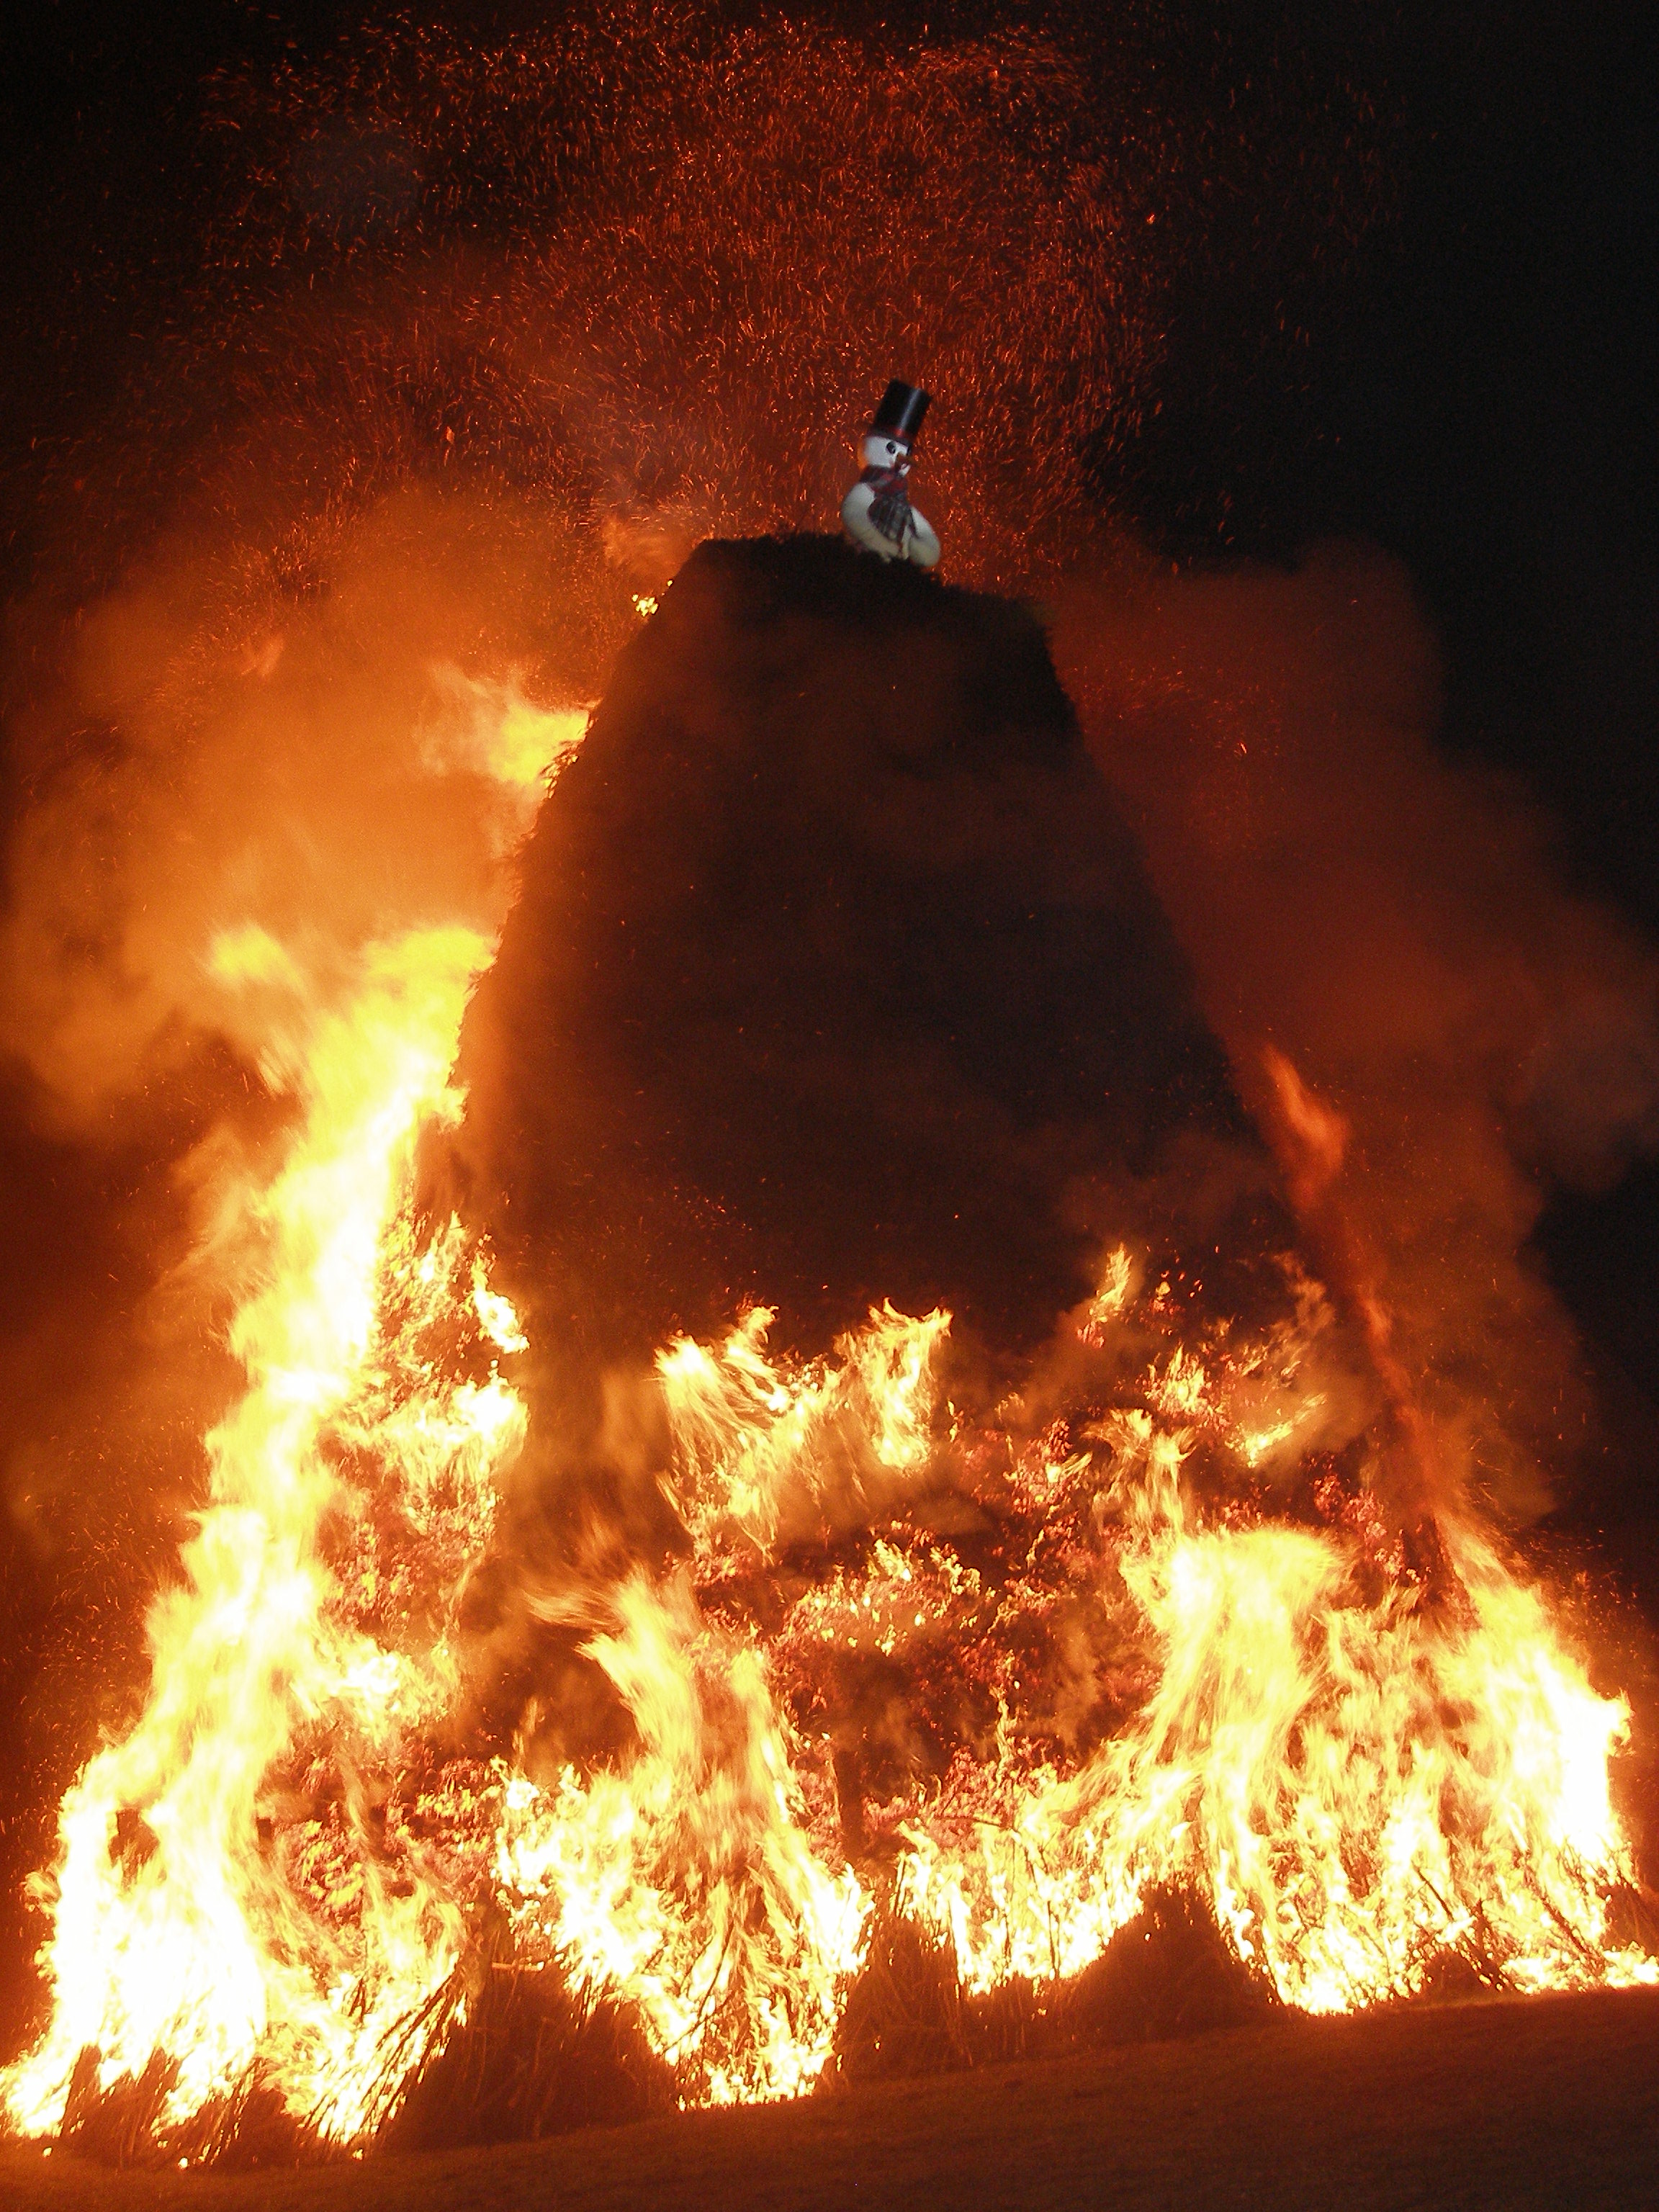 Snowman on top of the burning pyre